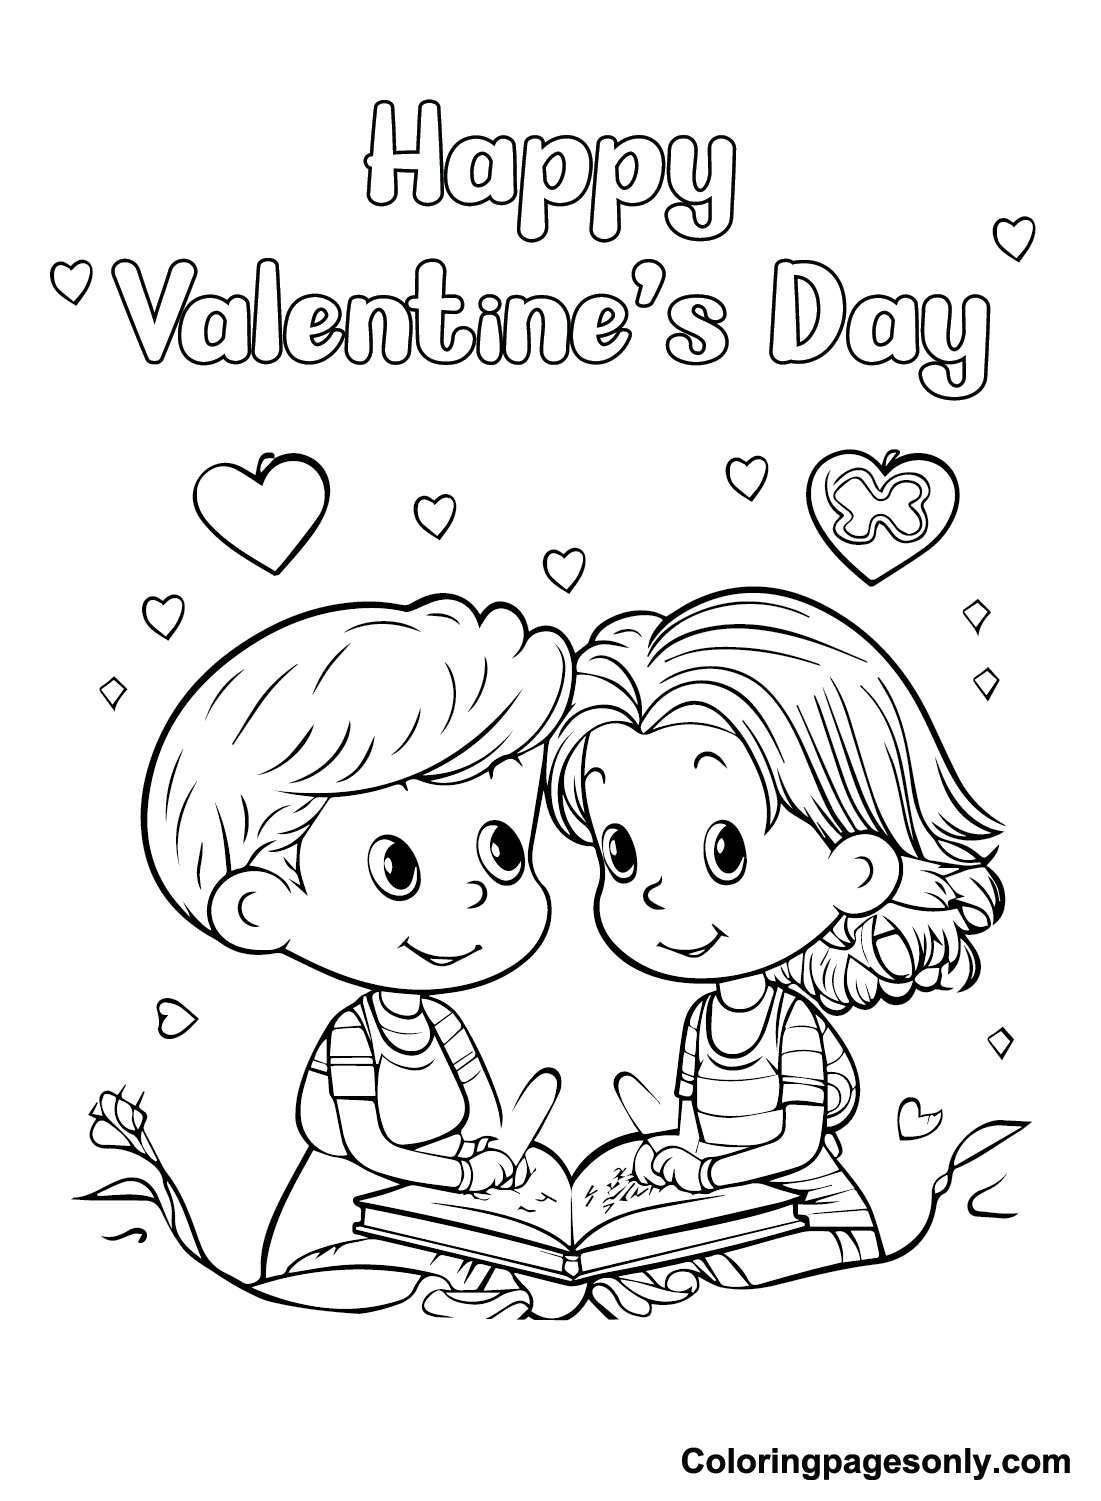 Happy Valentines Day Cards Coloring Pages